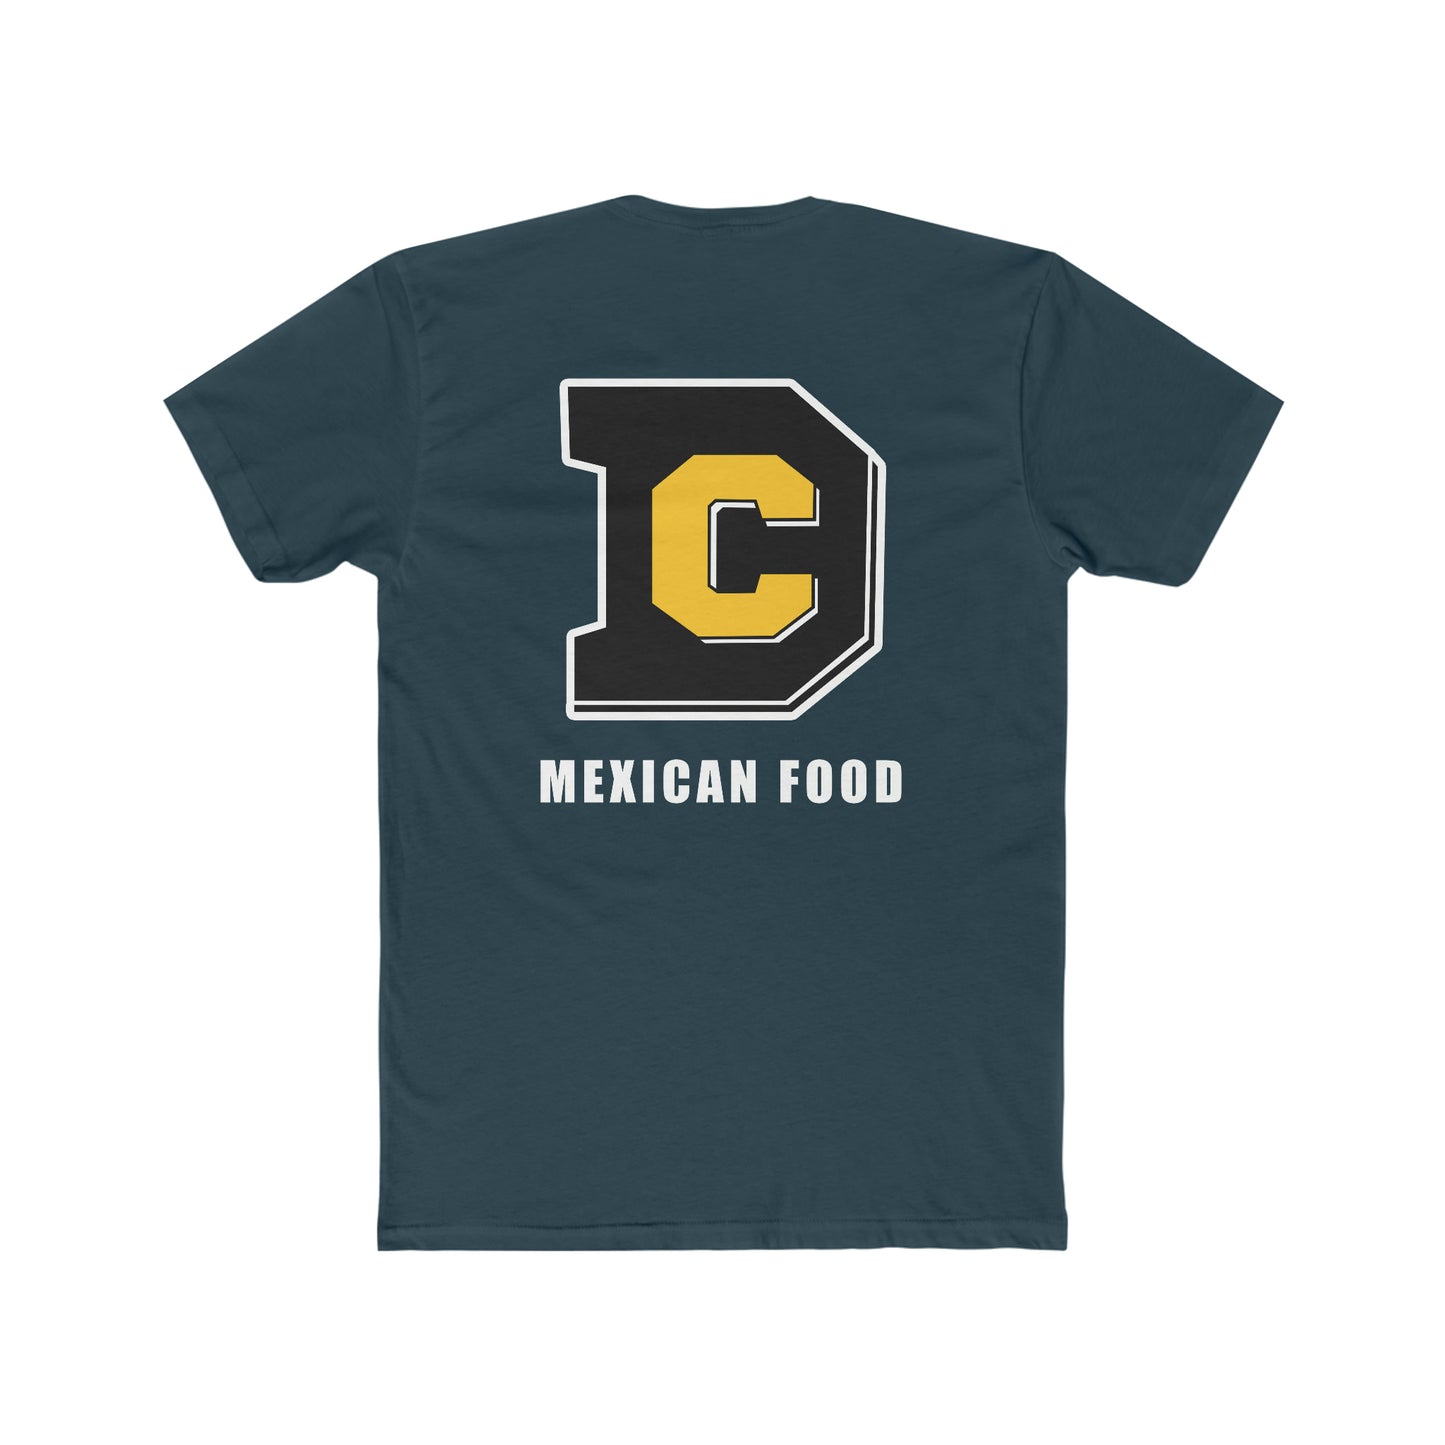 DC Mexican Food Black/White 2 sided  Cotton Crew Tee Next Level 3600